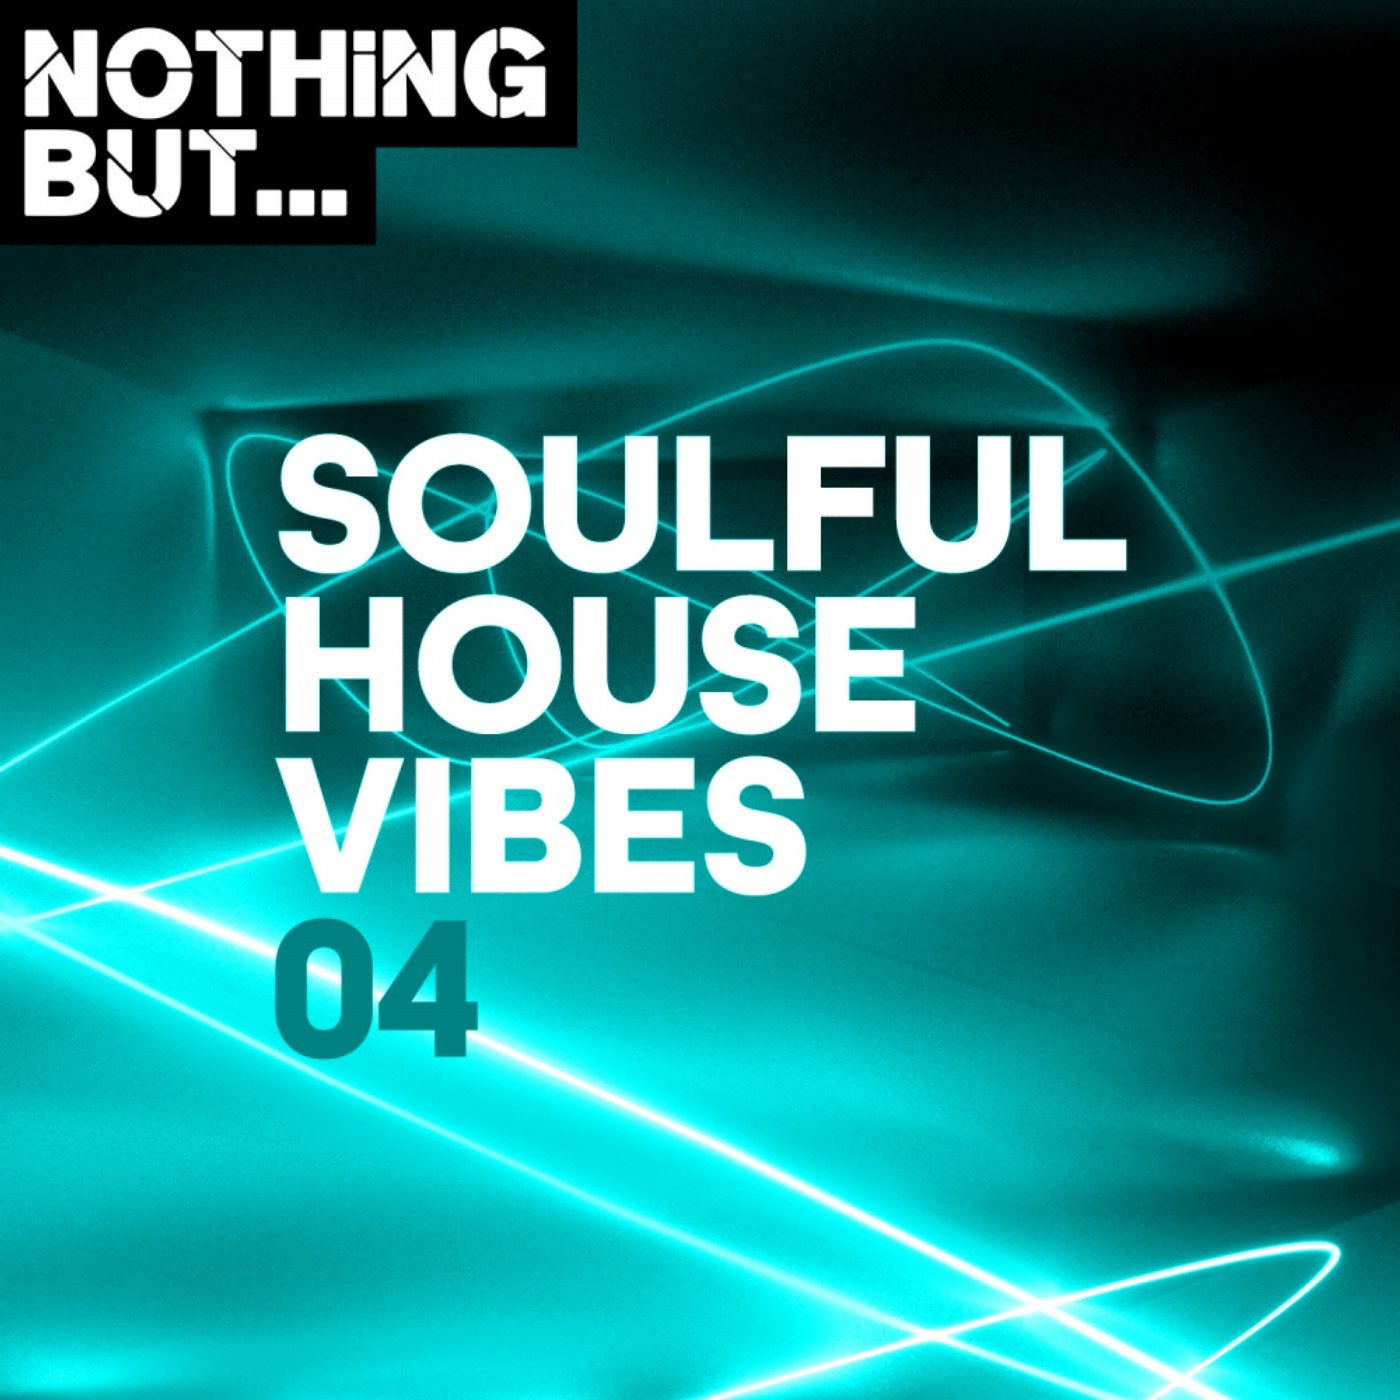 Nothing But... Soulful House Vibes, Vol. 04